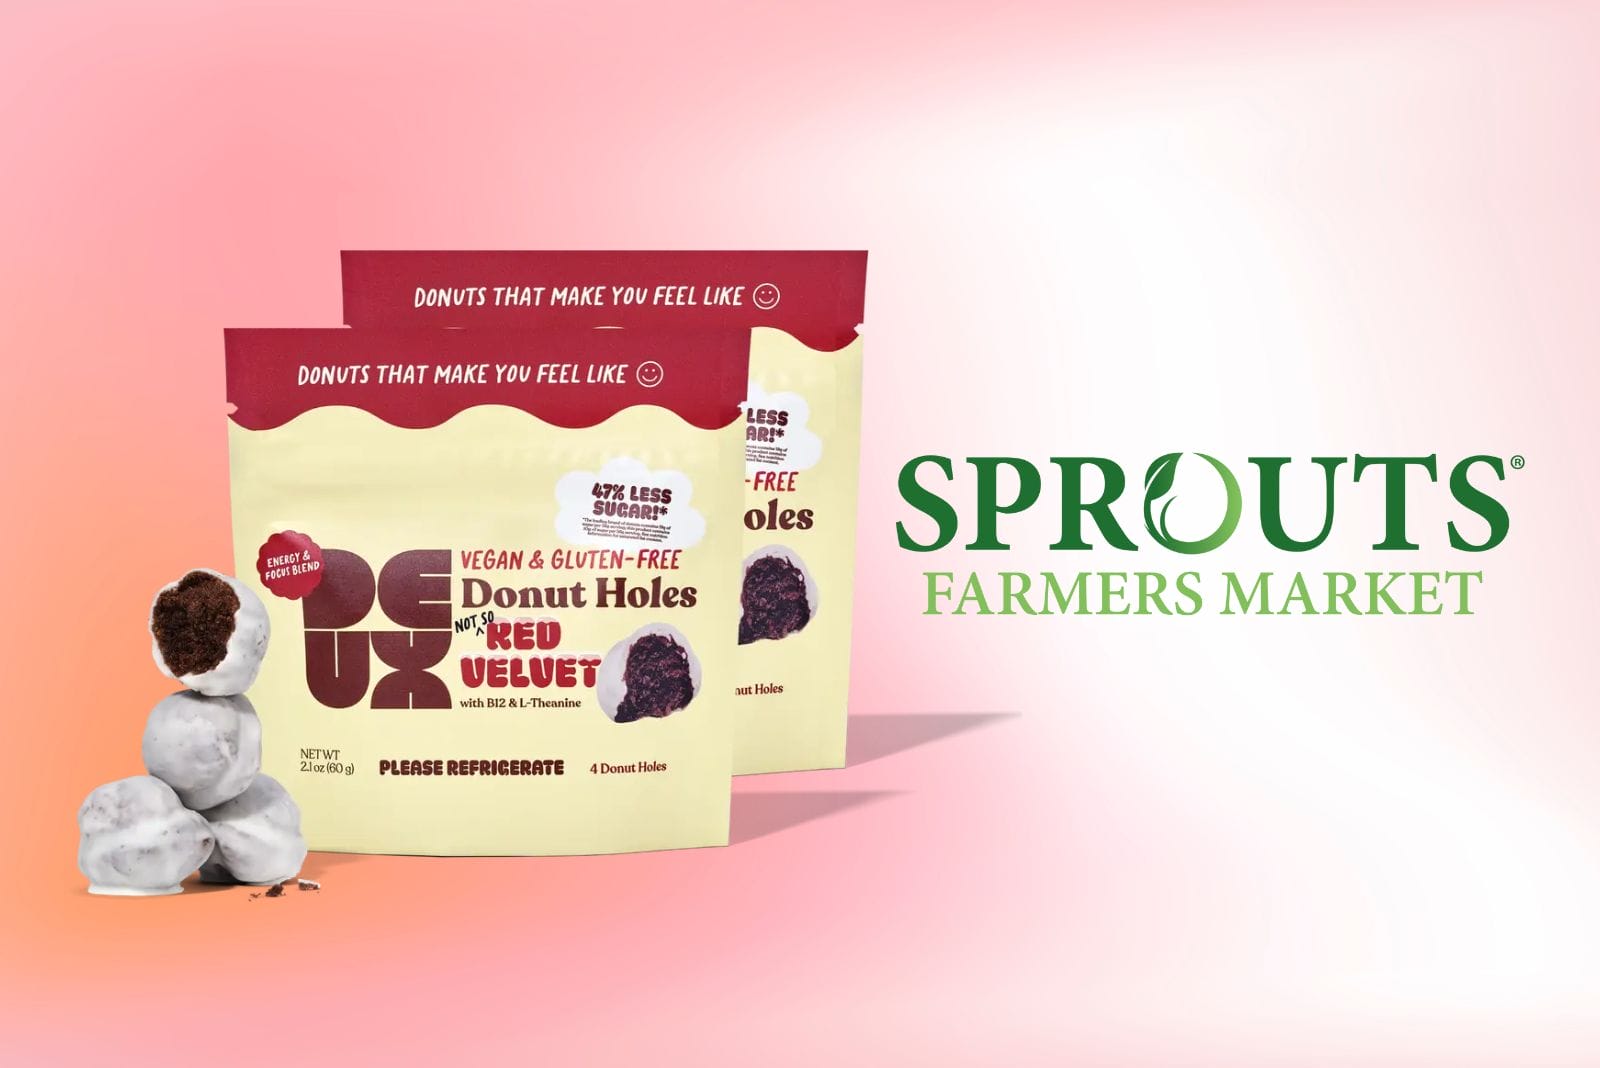 Red velvet DEUX donut holes packaging next to Sprouts Farmers Market logo